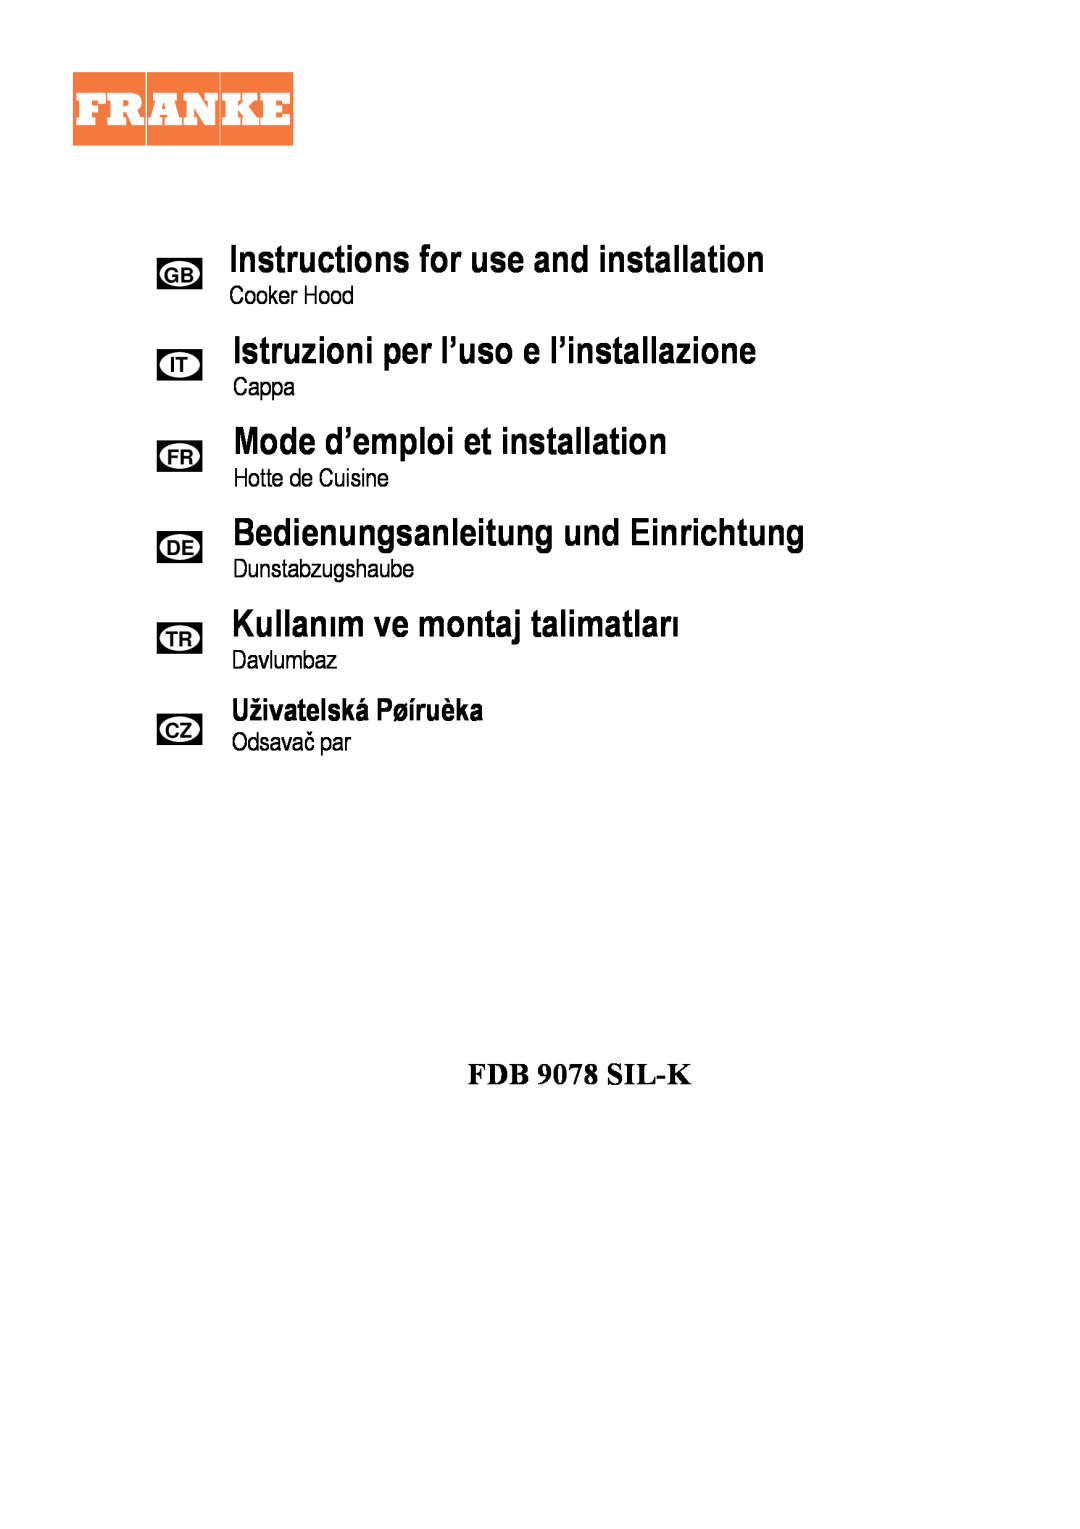 Franke Consumer Products FDB 9078 SIL-K manual Instructions for use and installation, Mode d’emploi et installation, Cappa 